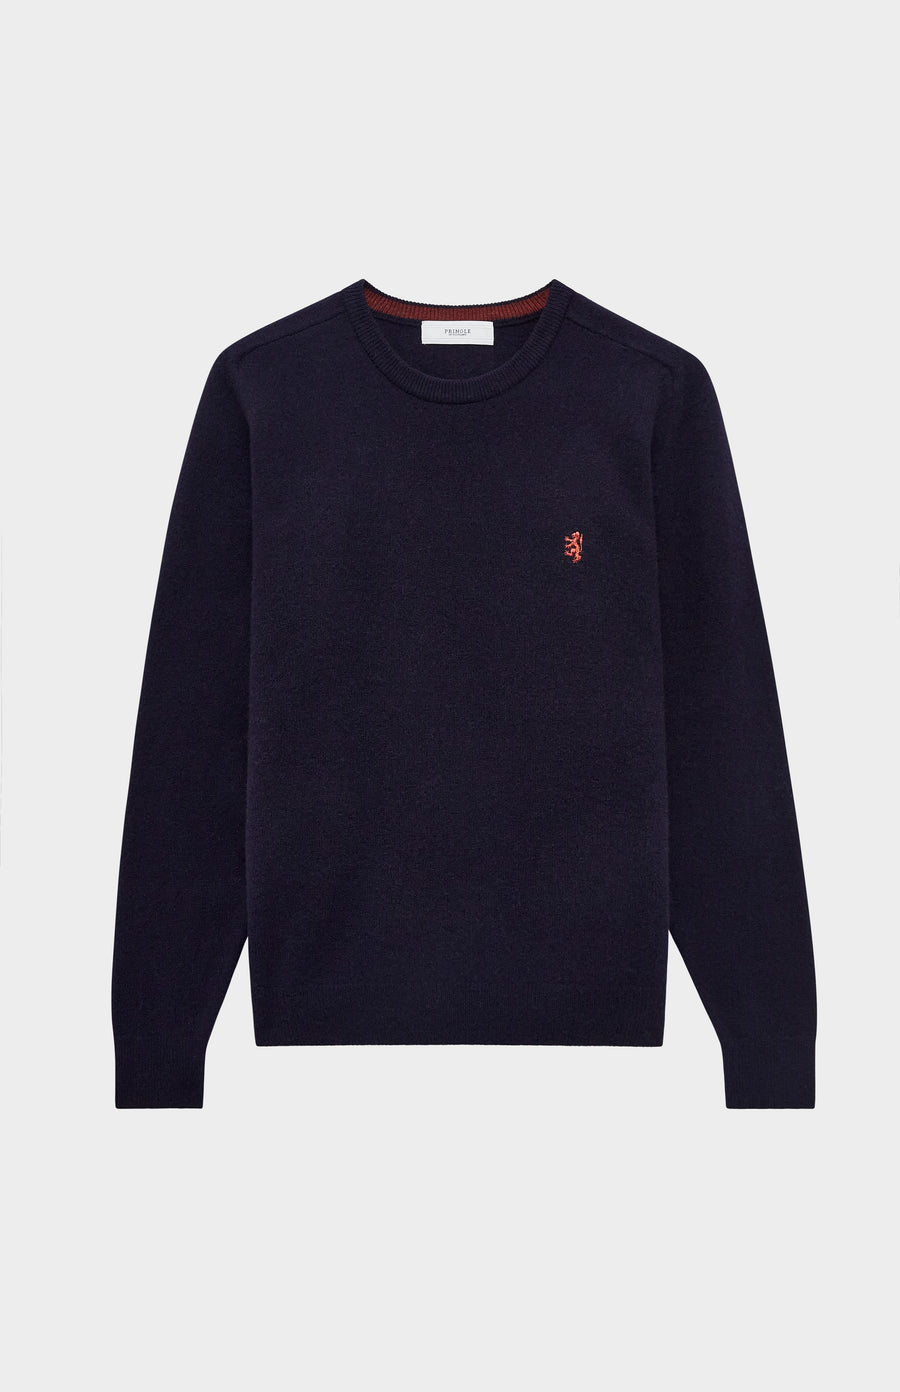 Pringle Round Neck Lion Lambswool Jumper In Navy & Rust Red